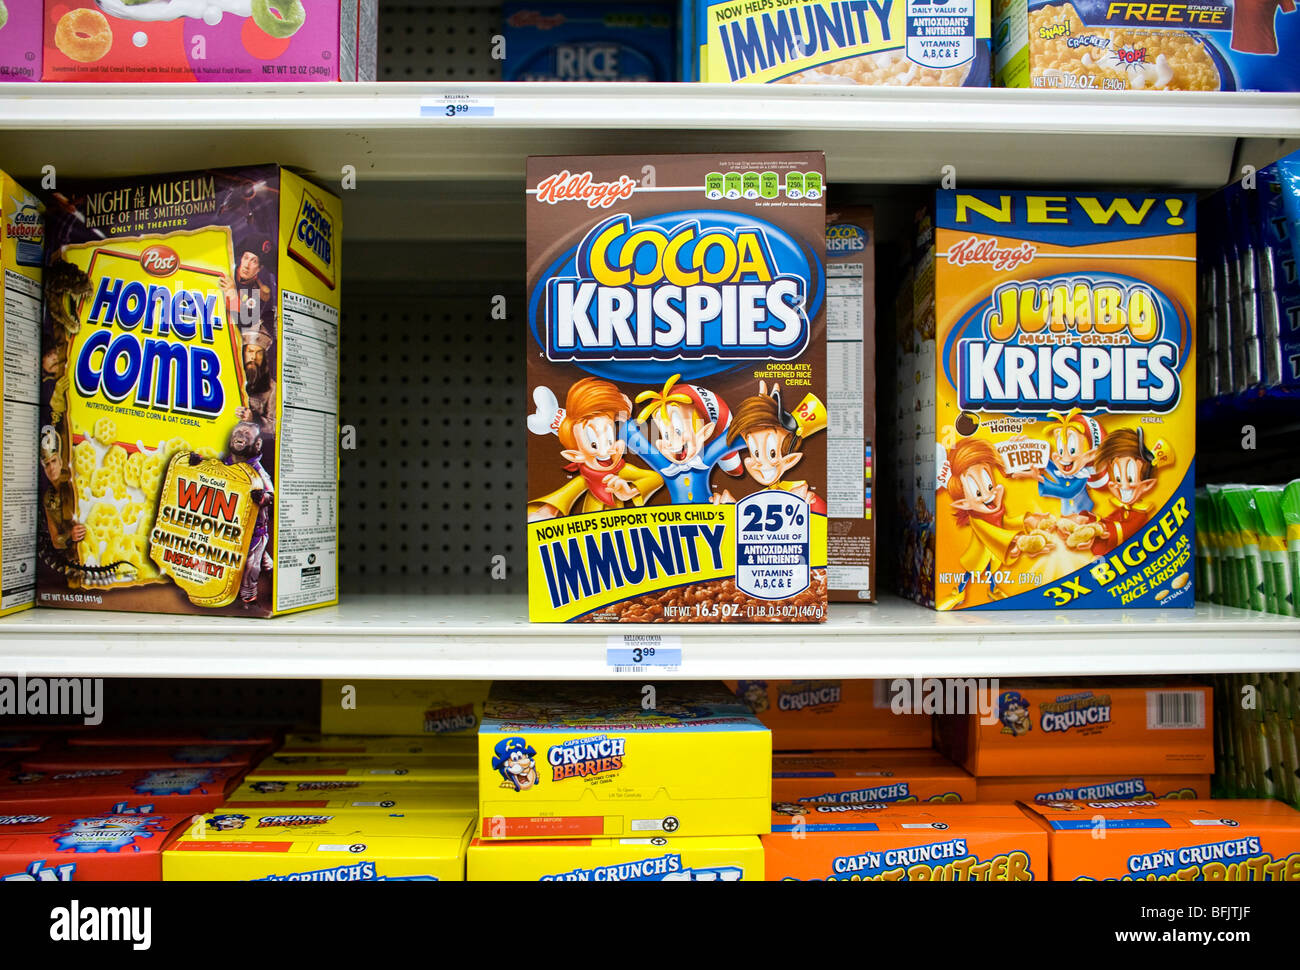 3 November 2009 – Frederick, Maryland – A Kellogg’s Rice Krispies Treat cereal box with labeling claiming that the cereal helps boost children’s immune systems. The controversial claim comes amid concerns over the H1N1 flu virus and its effects on children. Stock Photo